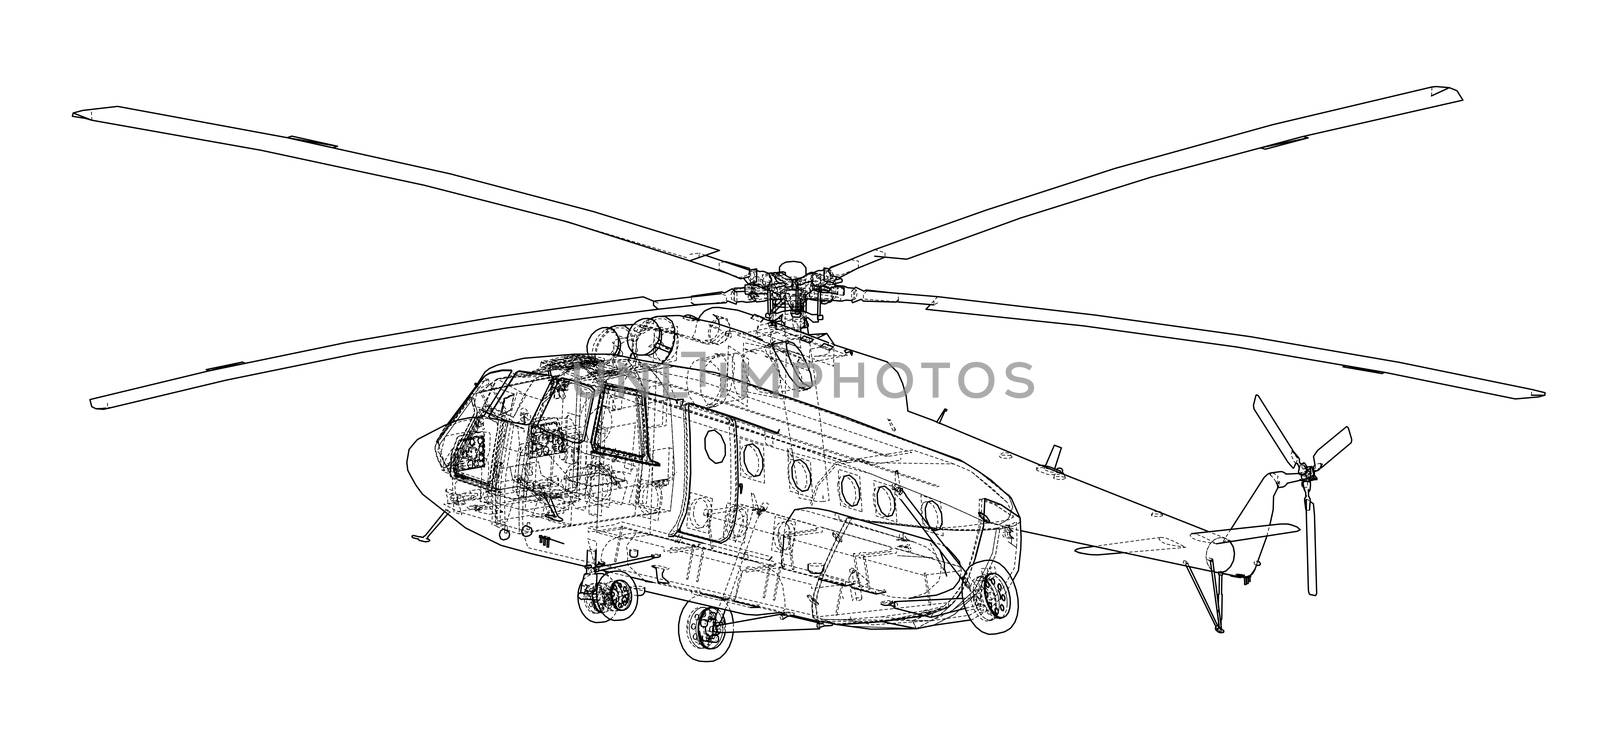 Engineering drawing or sketch of helicopter. 3d illustration